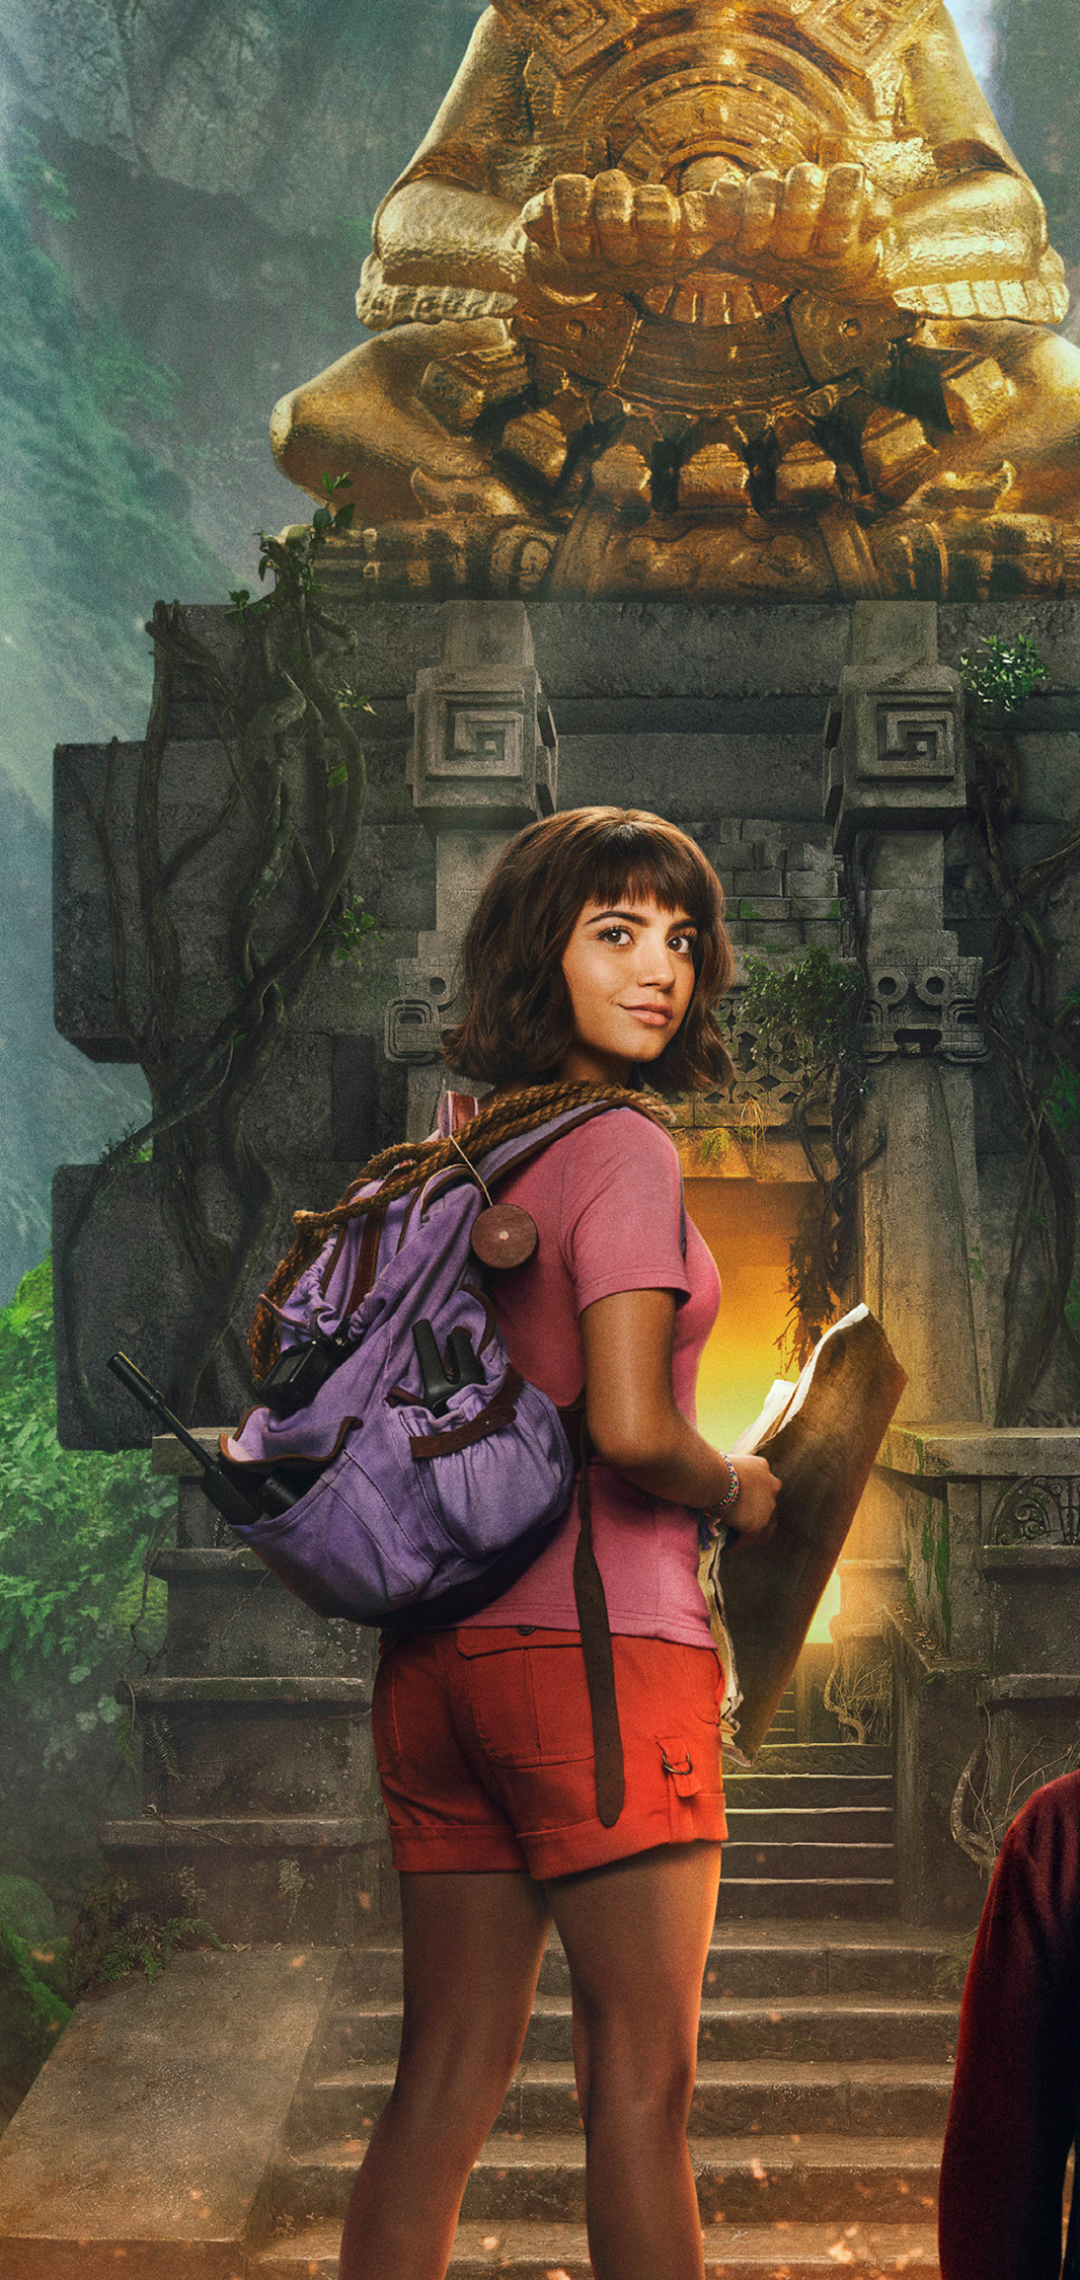 Dora And The Lost City Of Gold Wallpapers